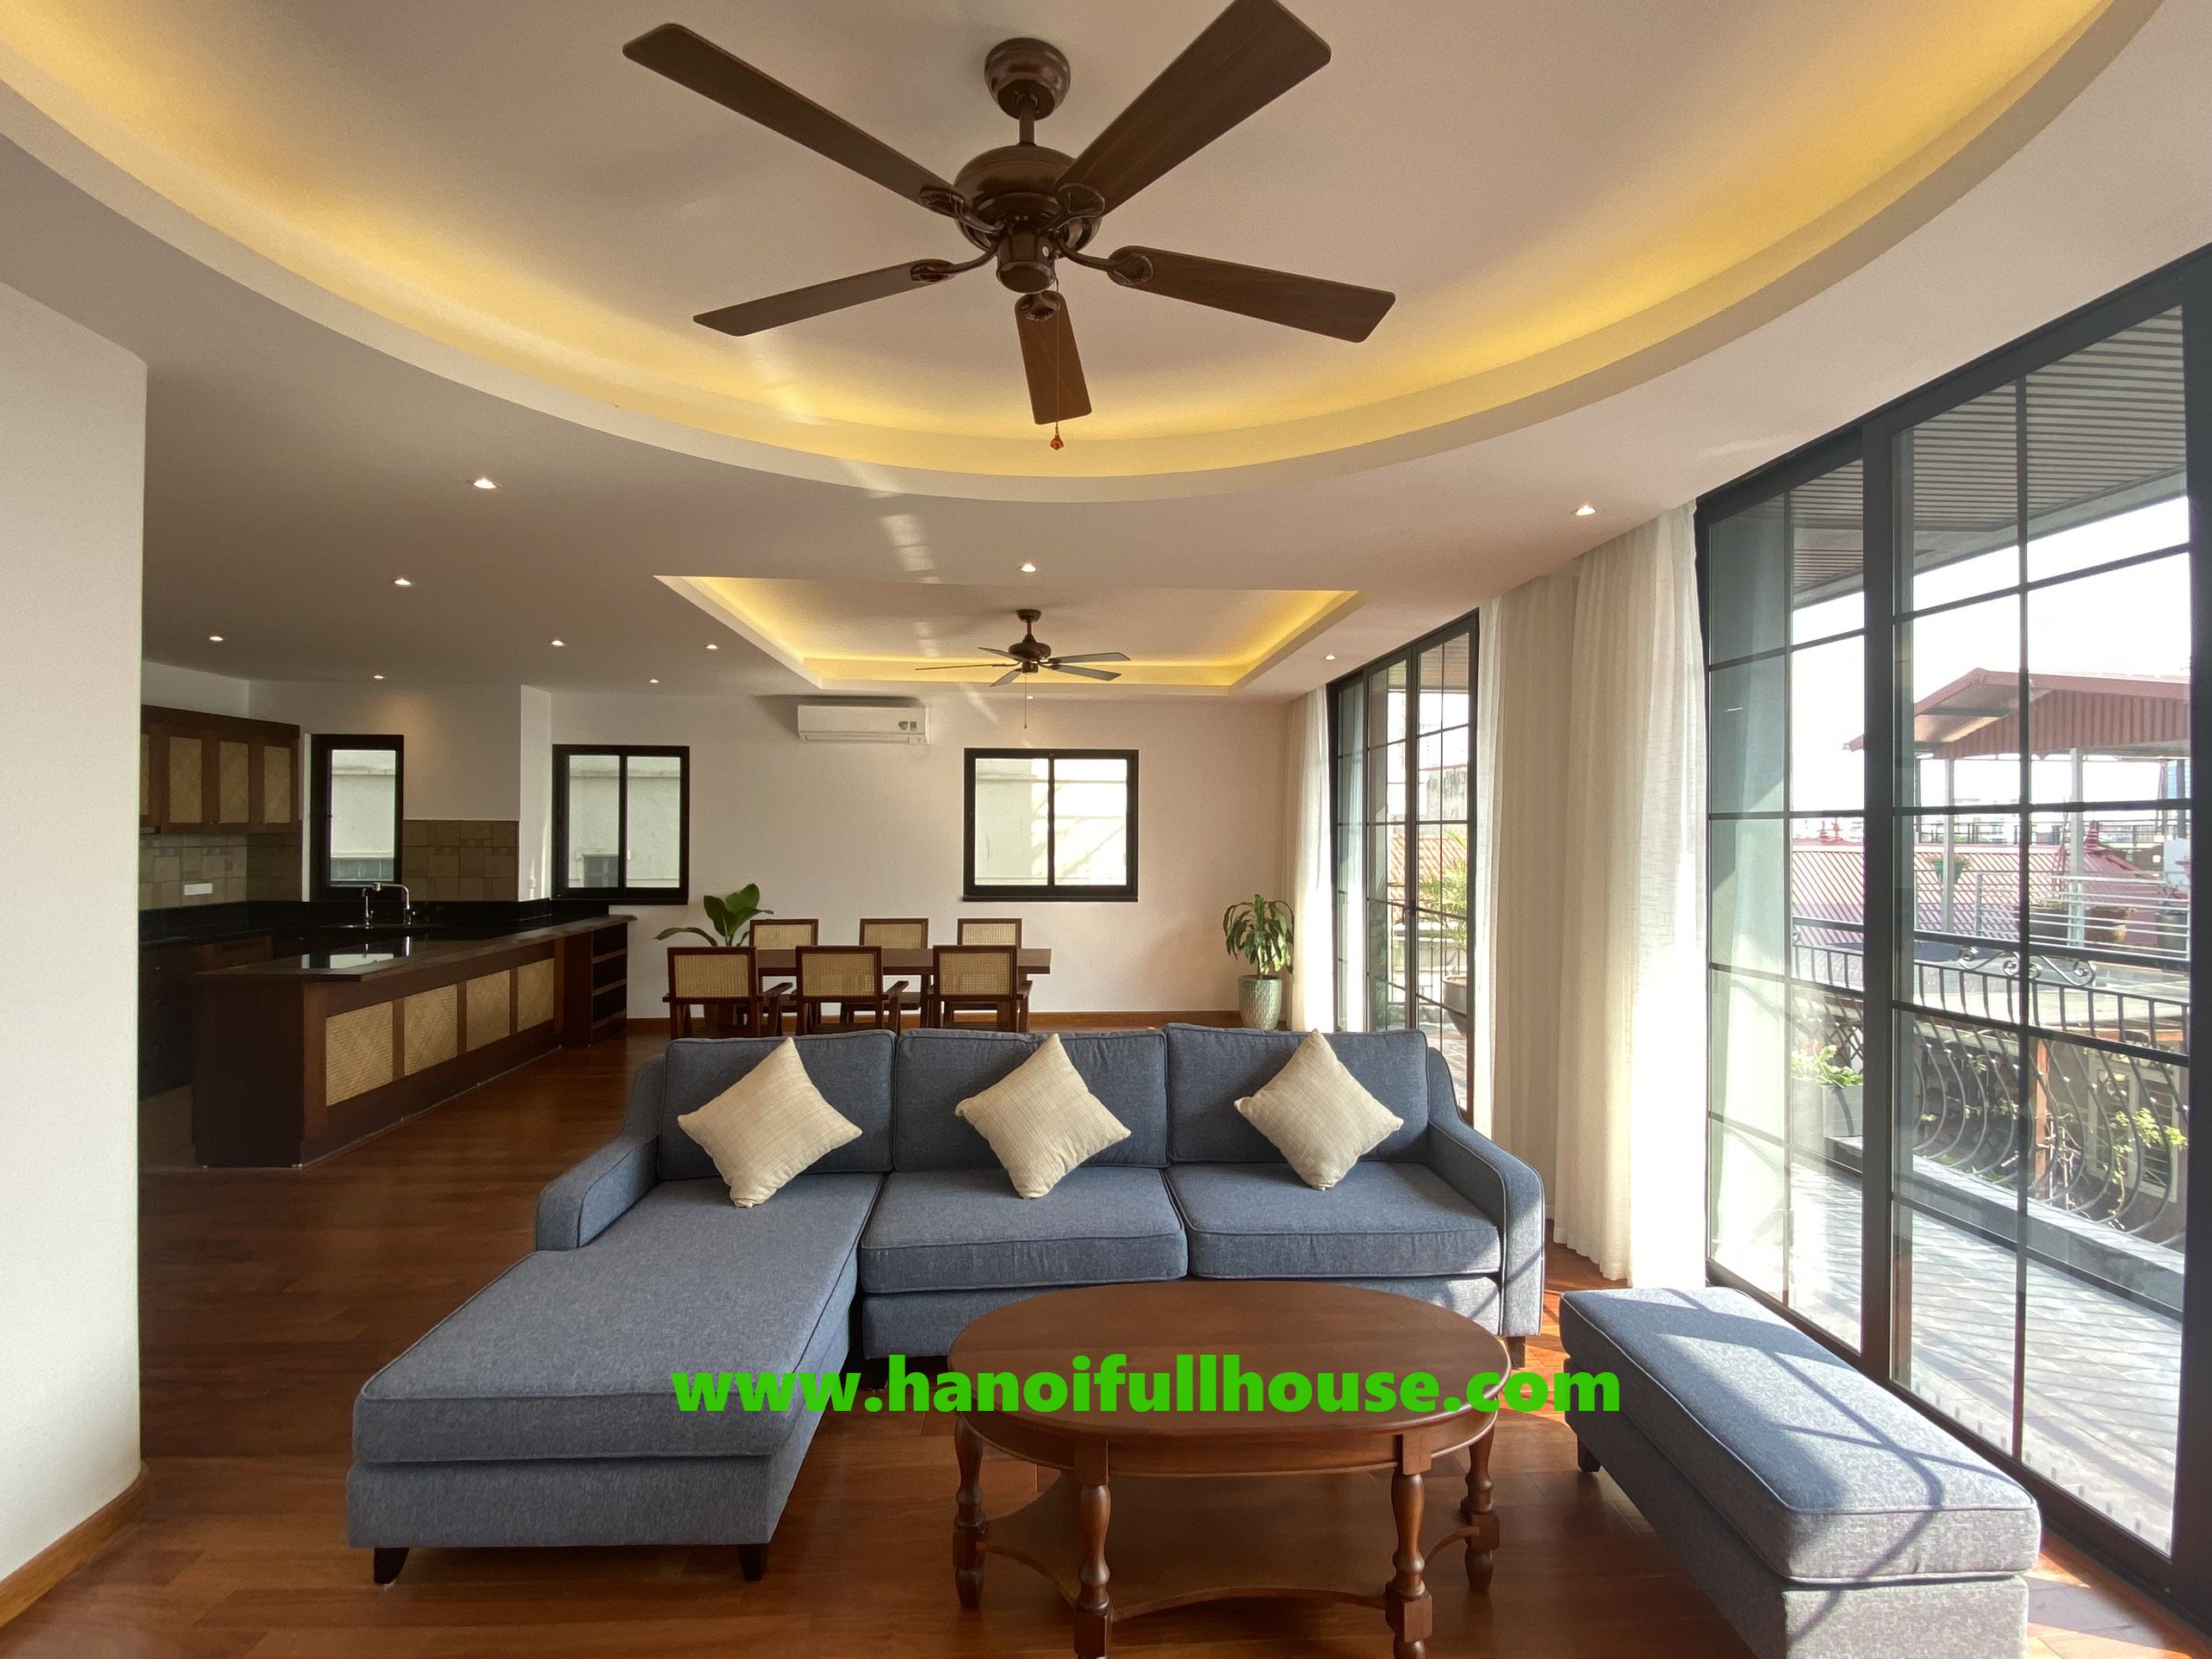 Elegant & cozy 4-BR duplex serviced apartment with large balcony overlooking West Lake